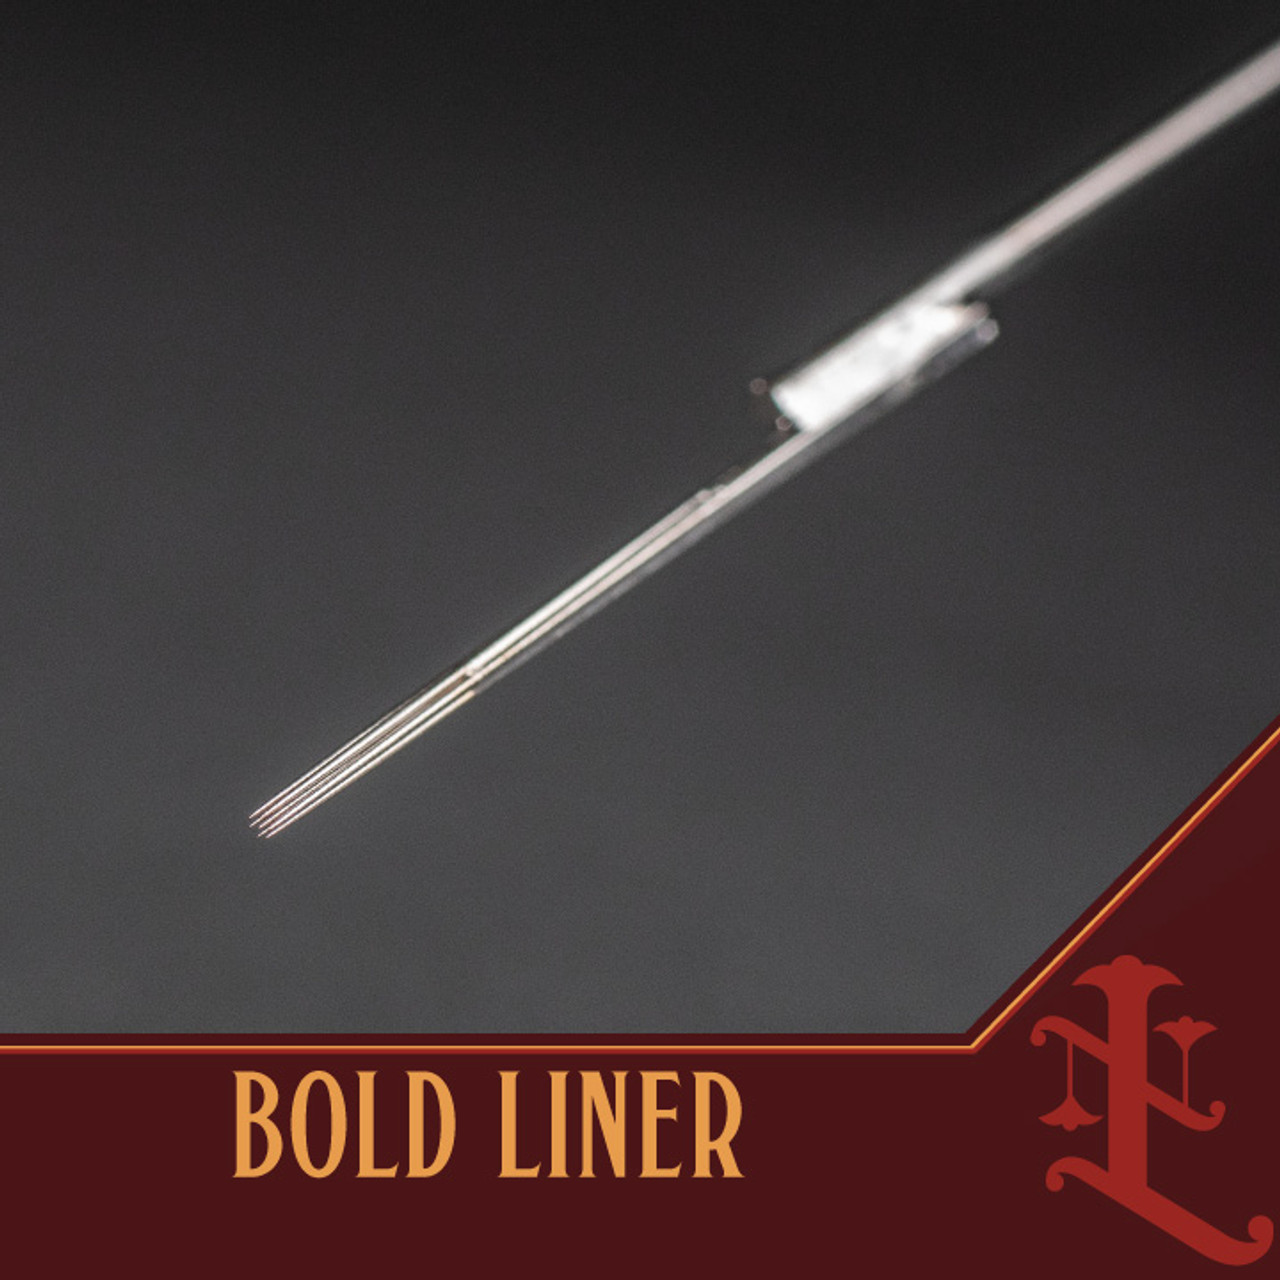 Lineage Bold Liners